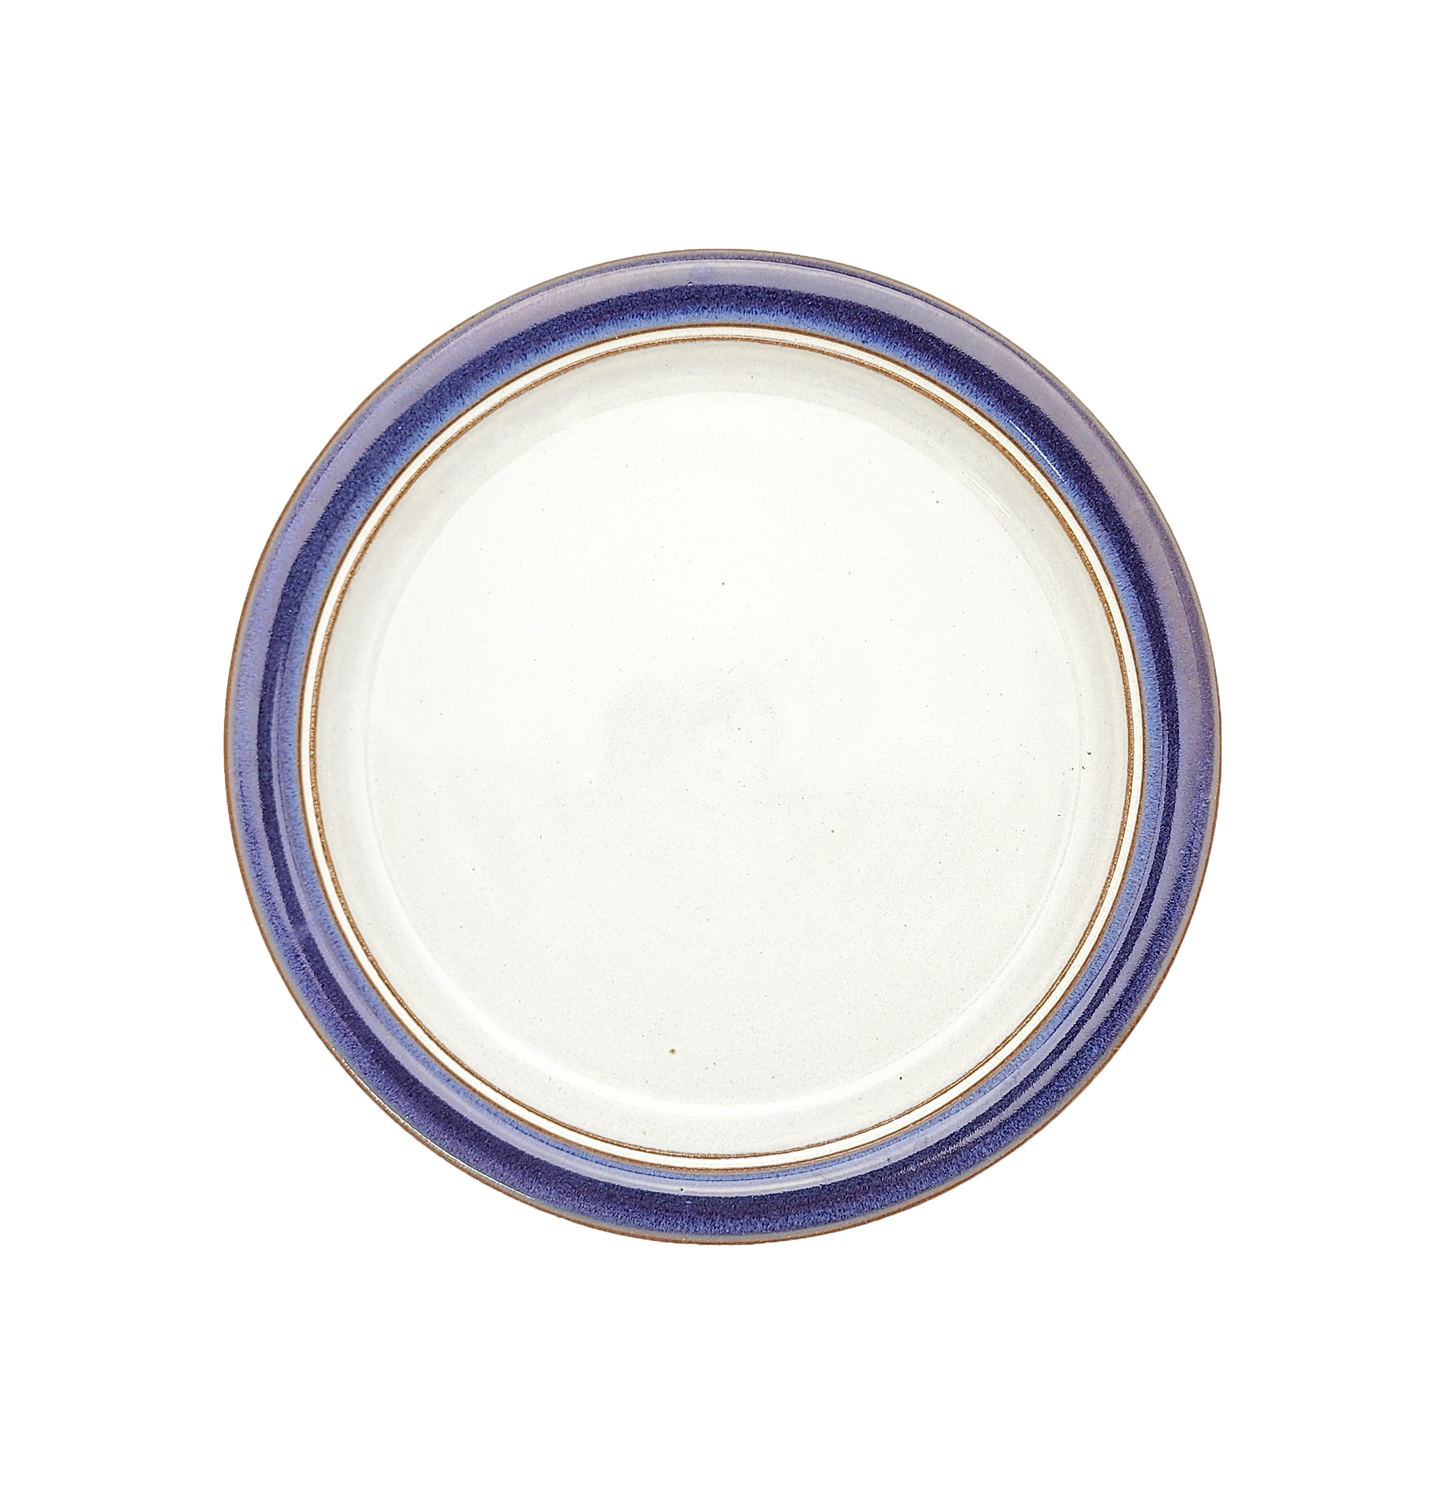 Image Description: A regal purple dinner plate from Clinton Pottery's Handmade Dinnerware Collection. The 10-inch plate showcases a rich and vibrant glaze, adding a touch of royalty to your dining setting. Its ample size makes it an ideal choice for serving a delightful dinner with a splash of bold and luxurious color.